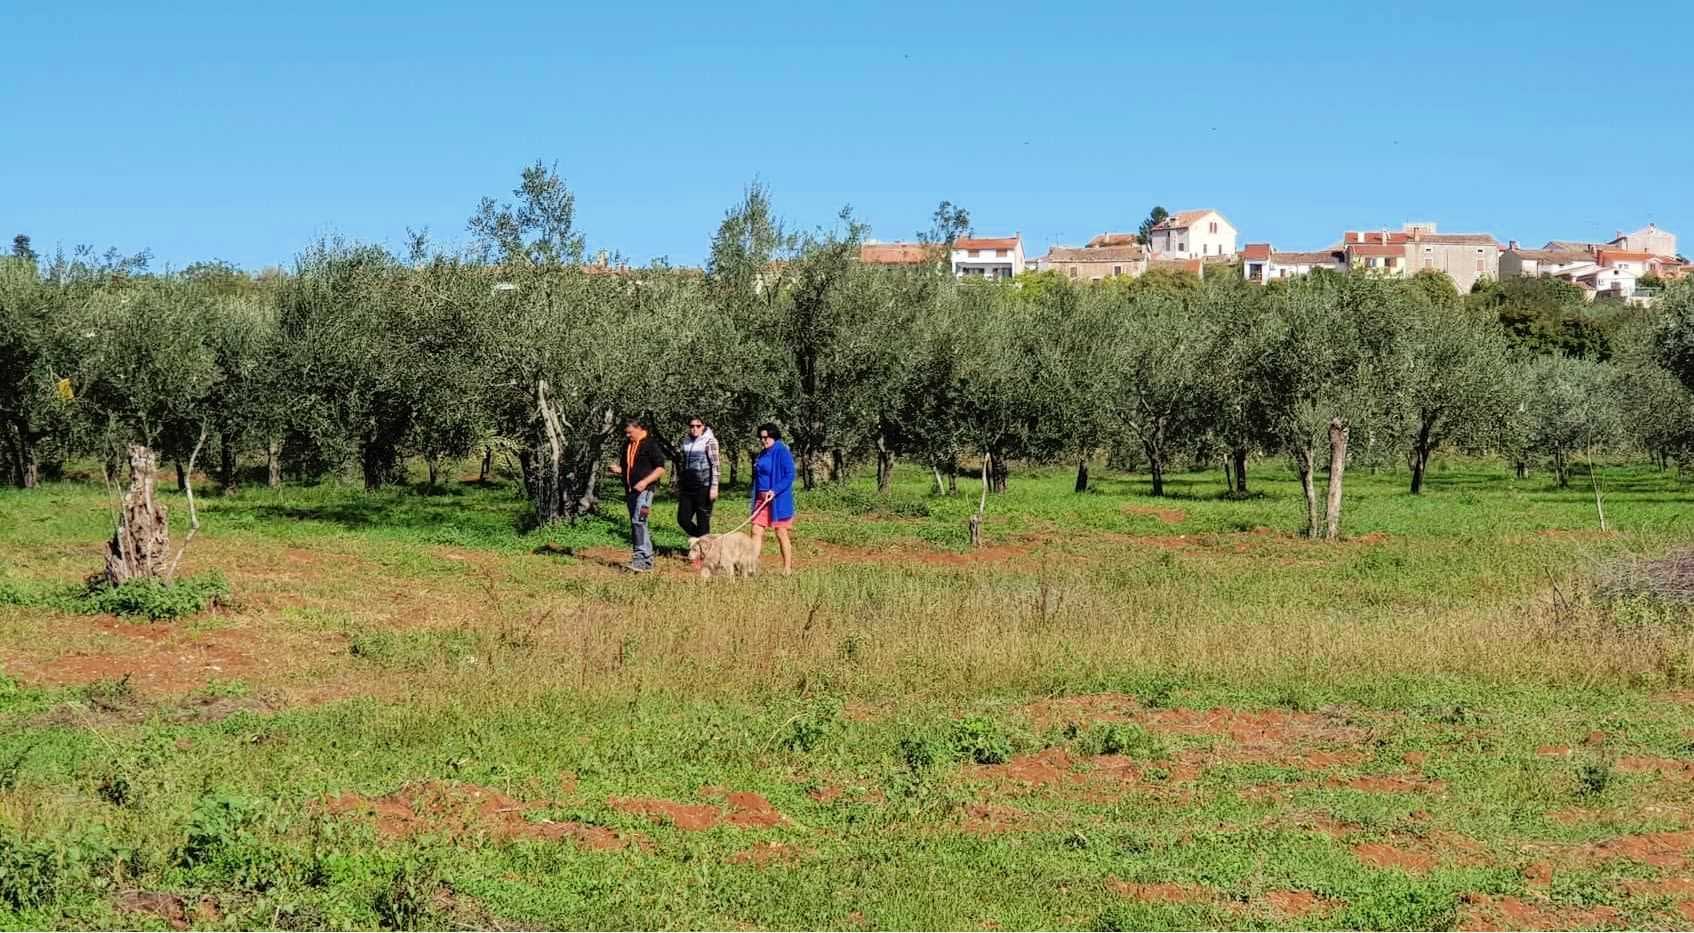 profiles-production-business-europe-awardwinning-farm-in-croatia-grows-its-brand-in-the-austrian-market-olive-oil-times